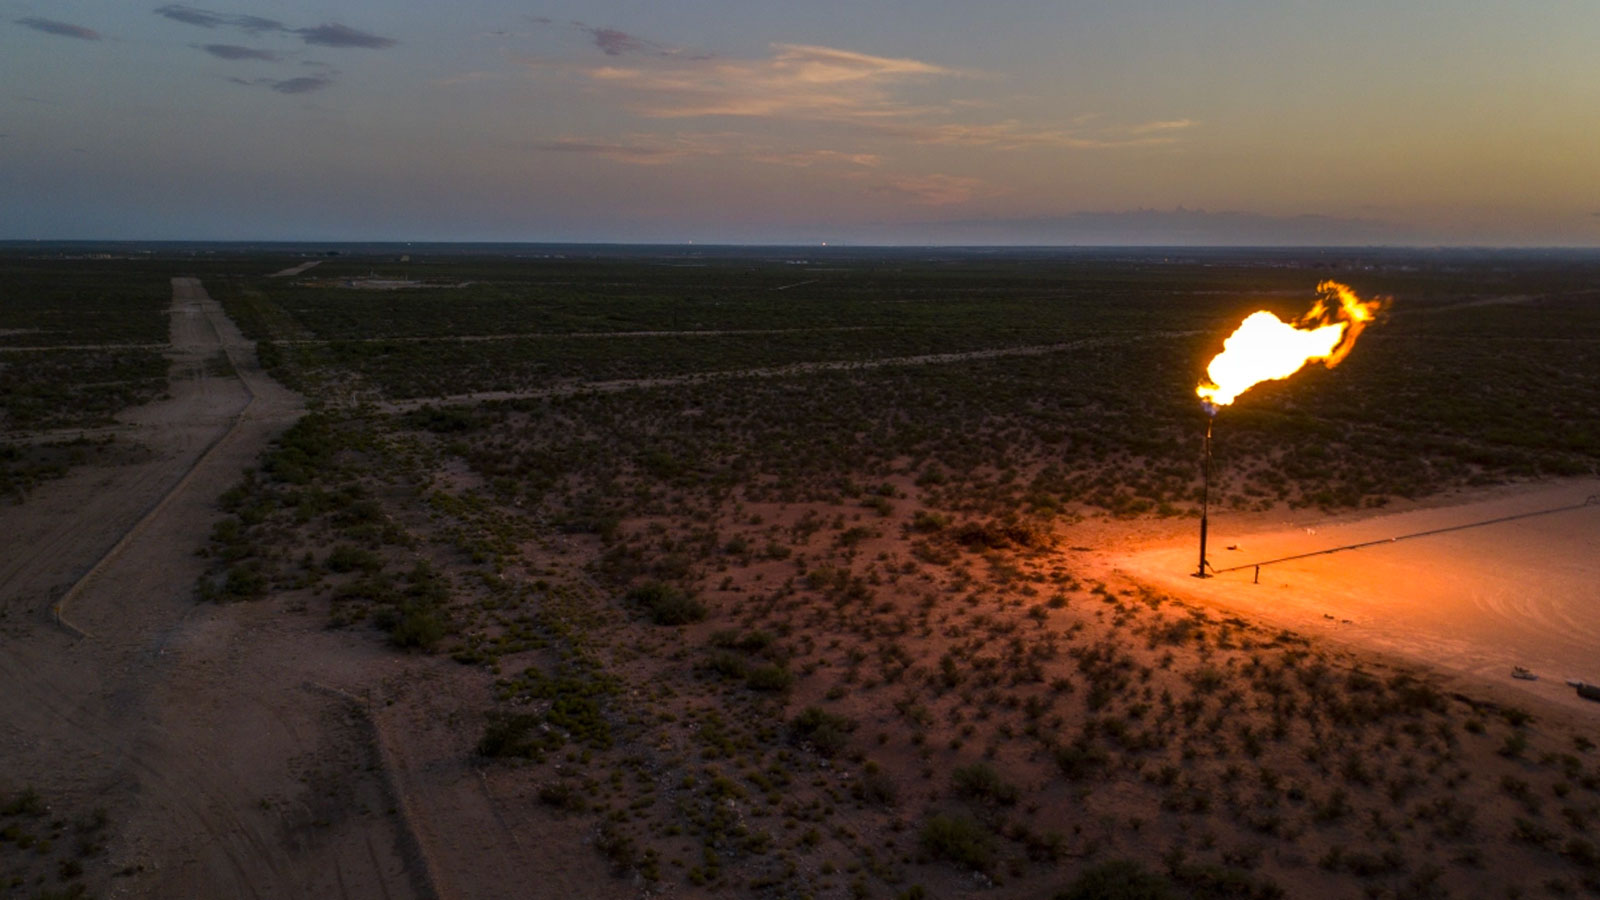 A gas flare burns at dusk in the Permian Basin in Texas, U.S.